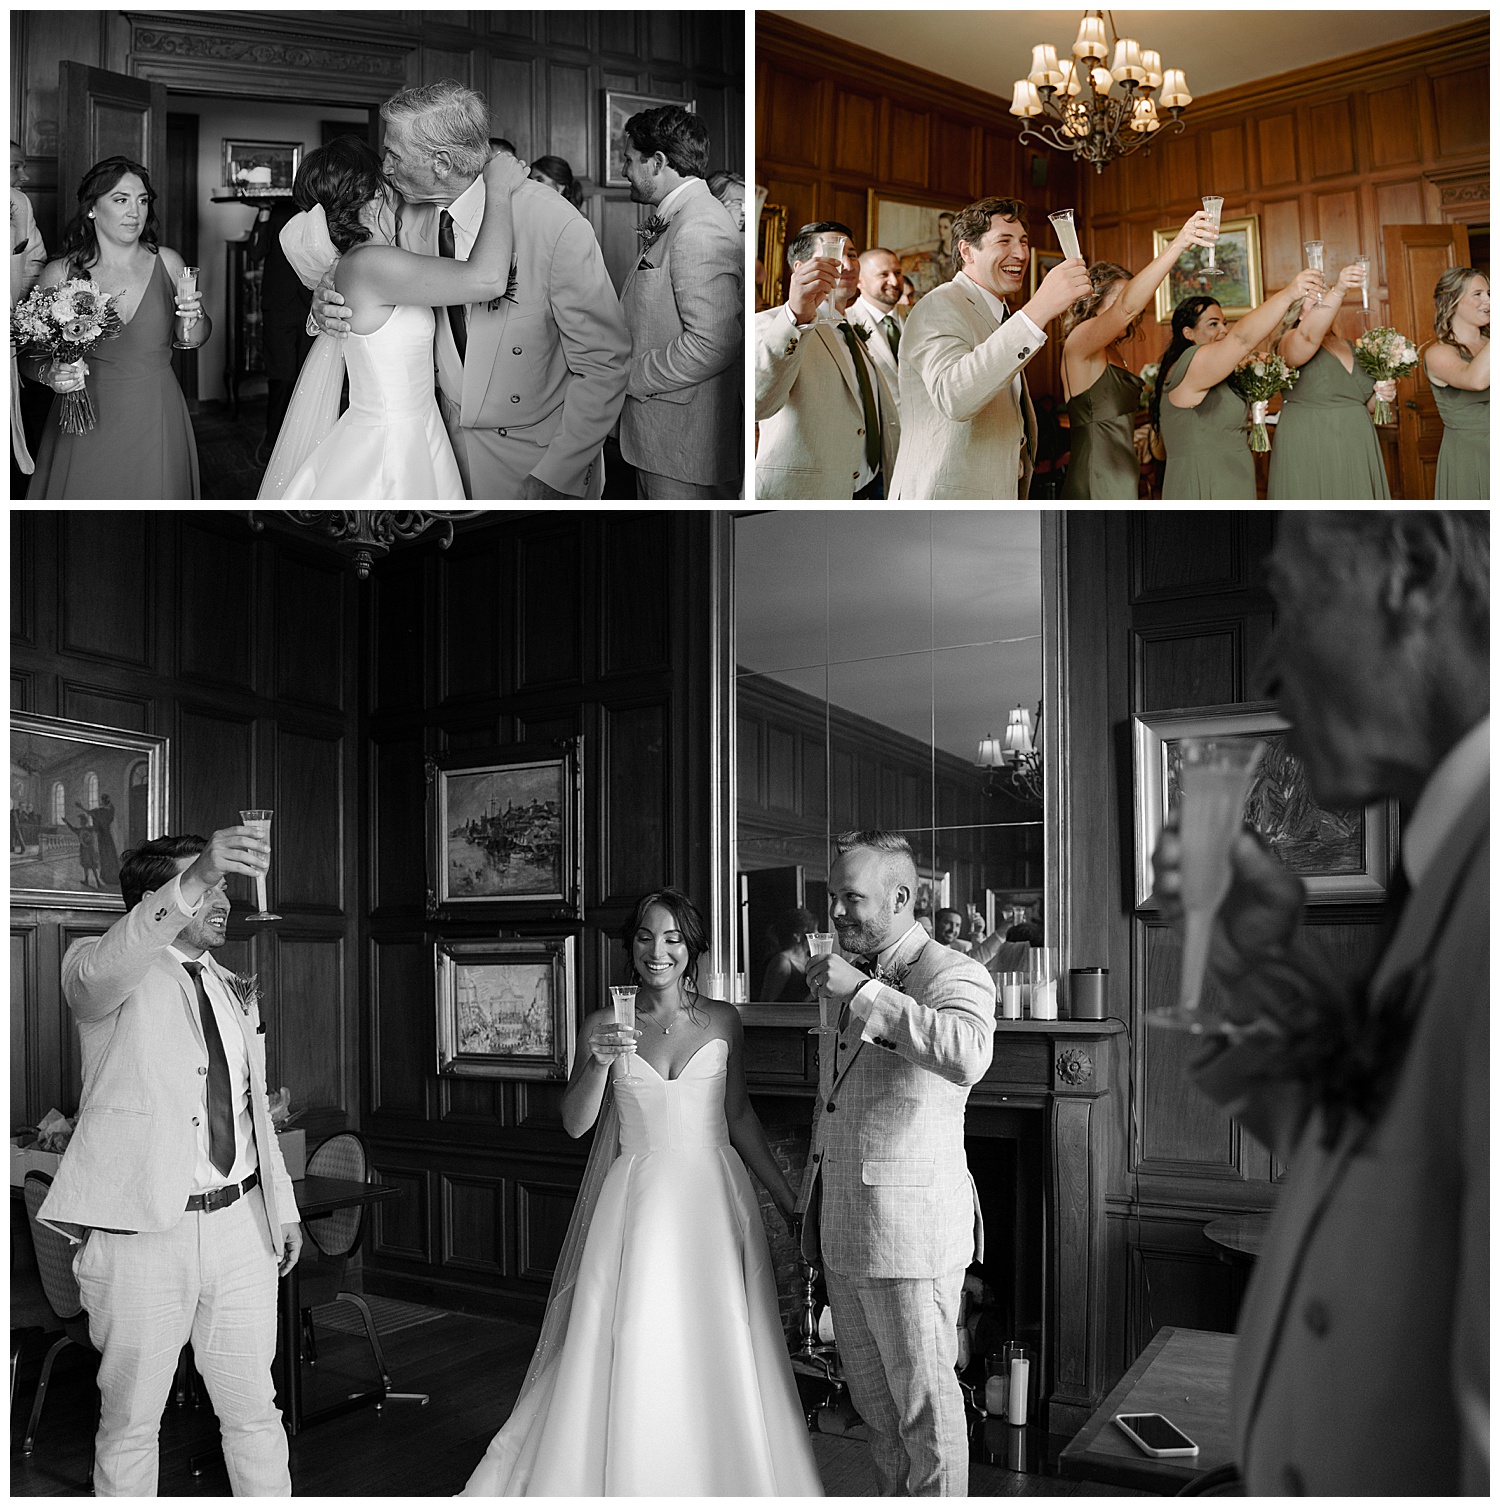 Black and white candids of celebrating the wedding ceremony with friends and family